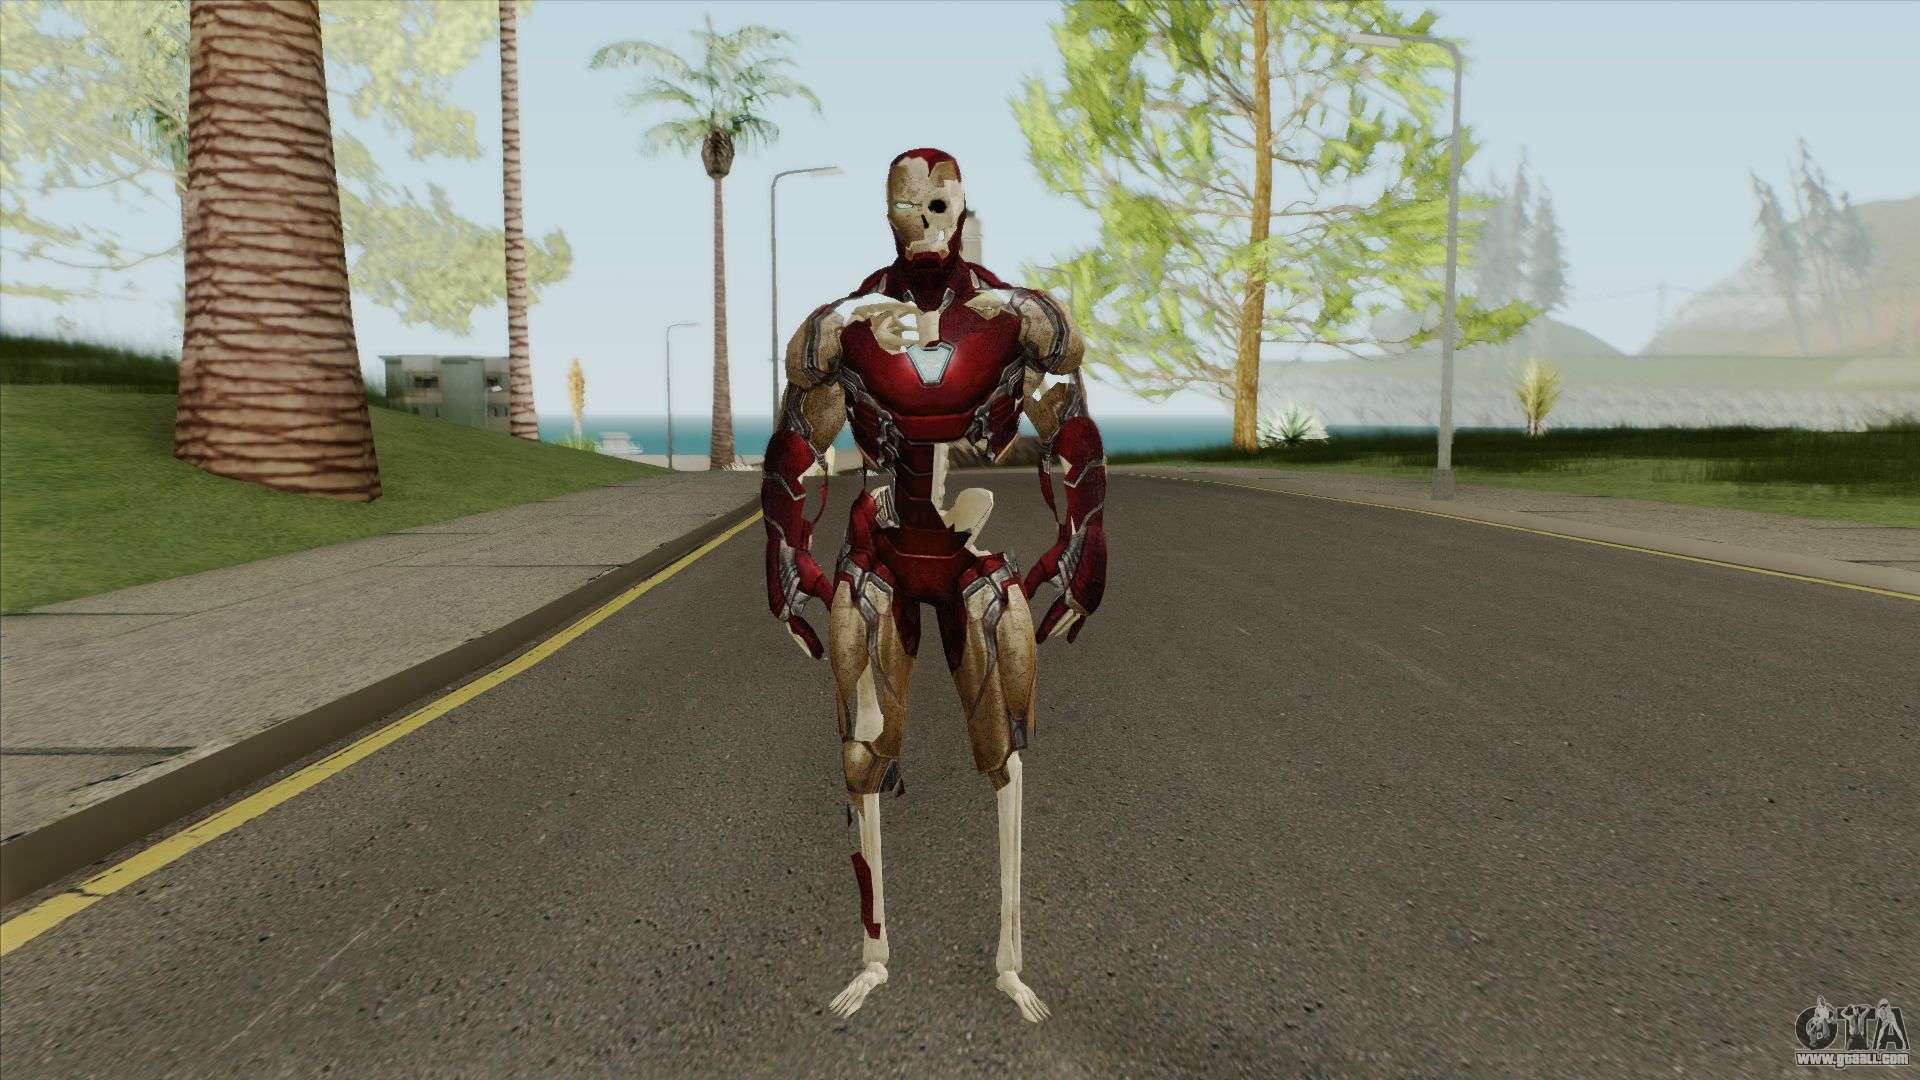 Iron Man Zombie (Spider-Man: Far From Home) for GTA San Andreas